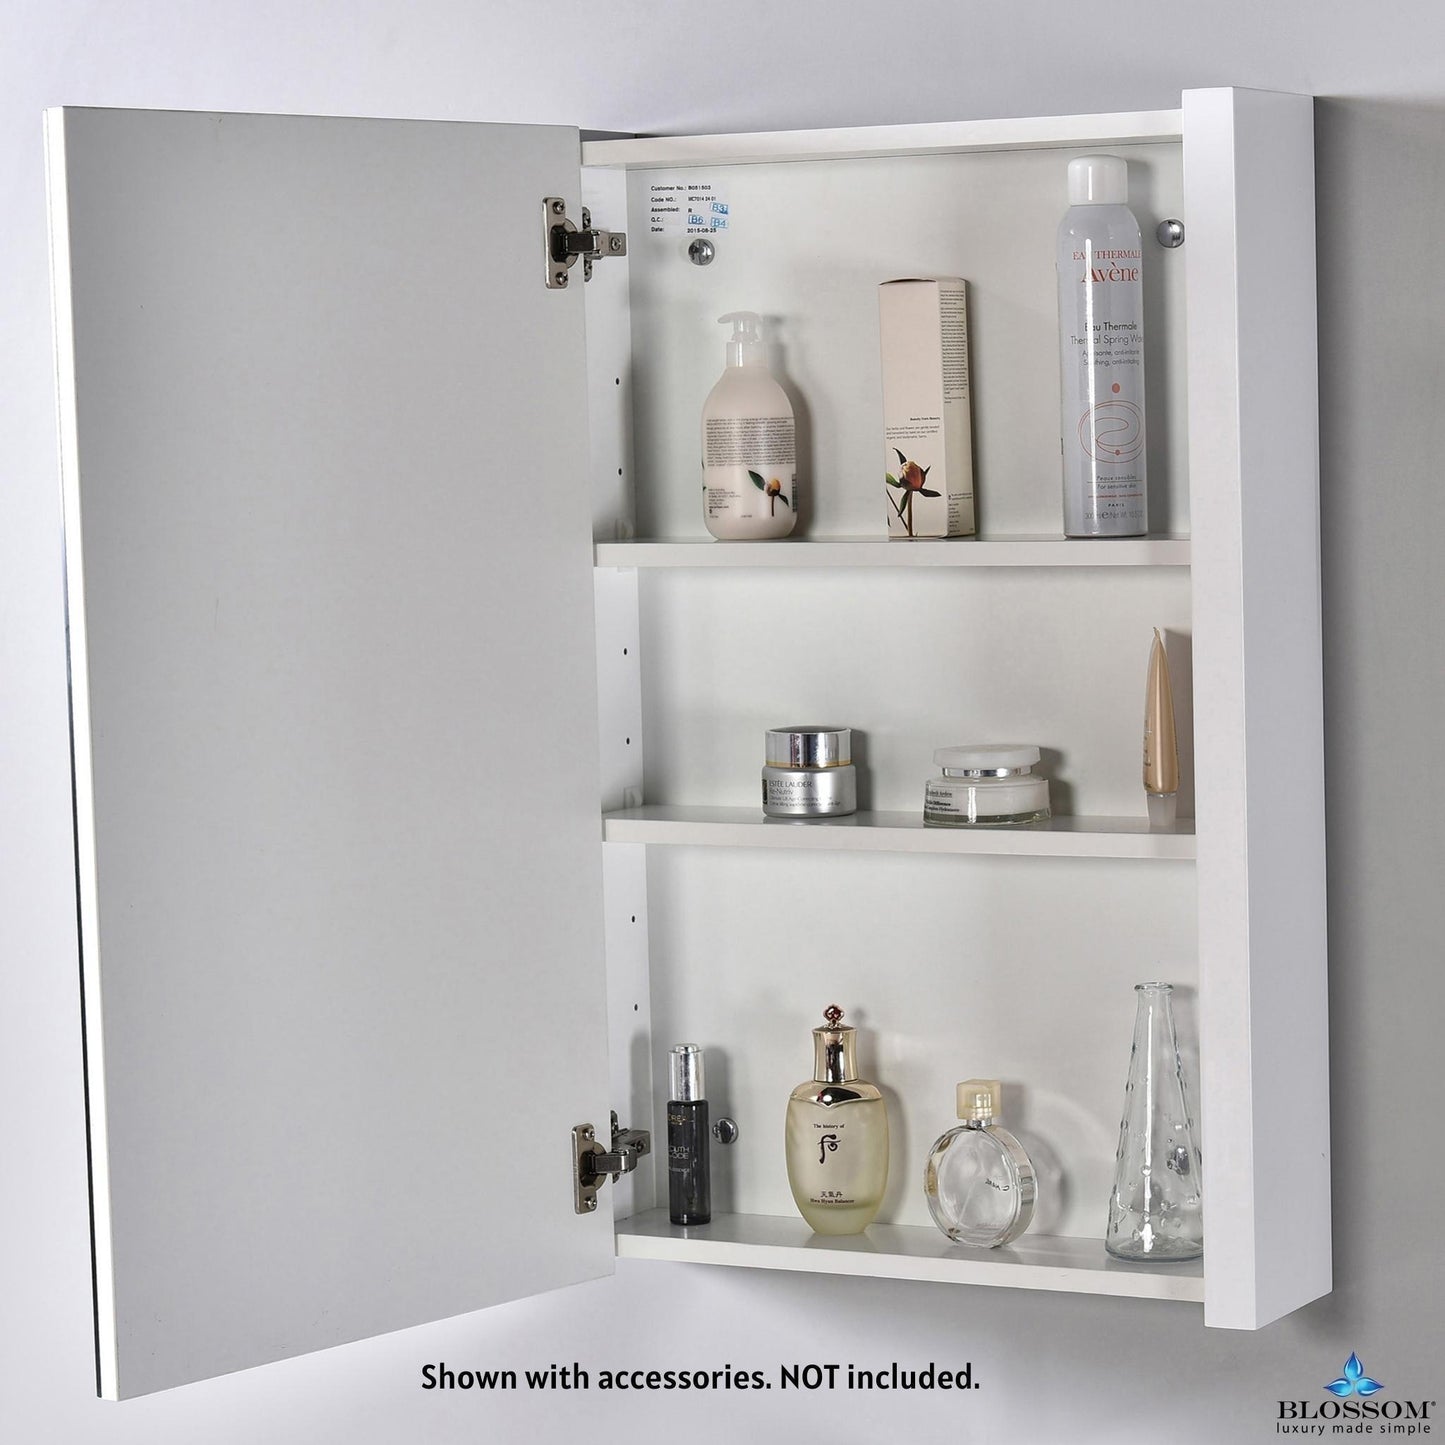 Blossom Milan 20" x 32" White Recessed or Surface Mount Single Door Mirror Medicine Cabinet With Adjustable Wood Shelves and Soft-Closing Hinges